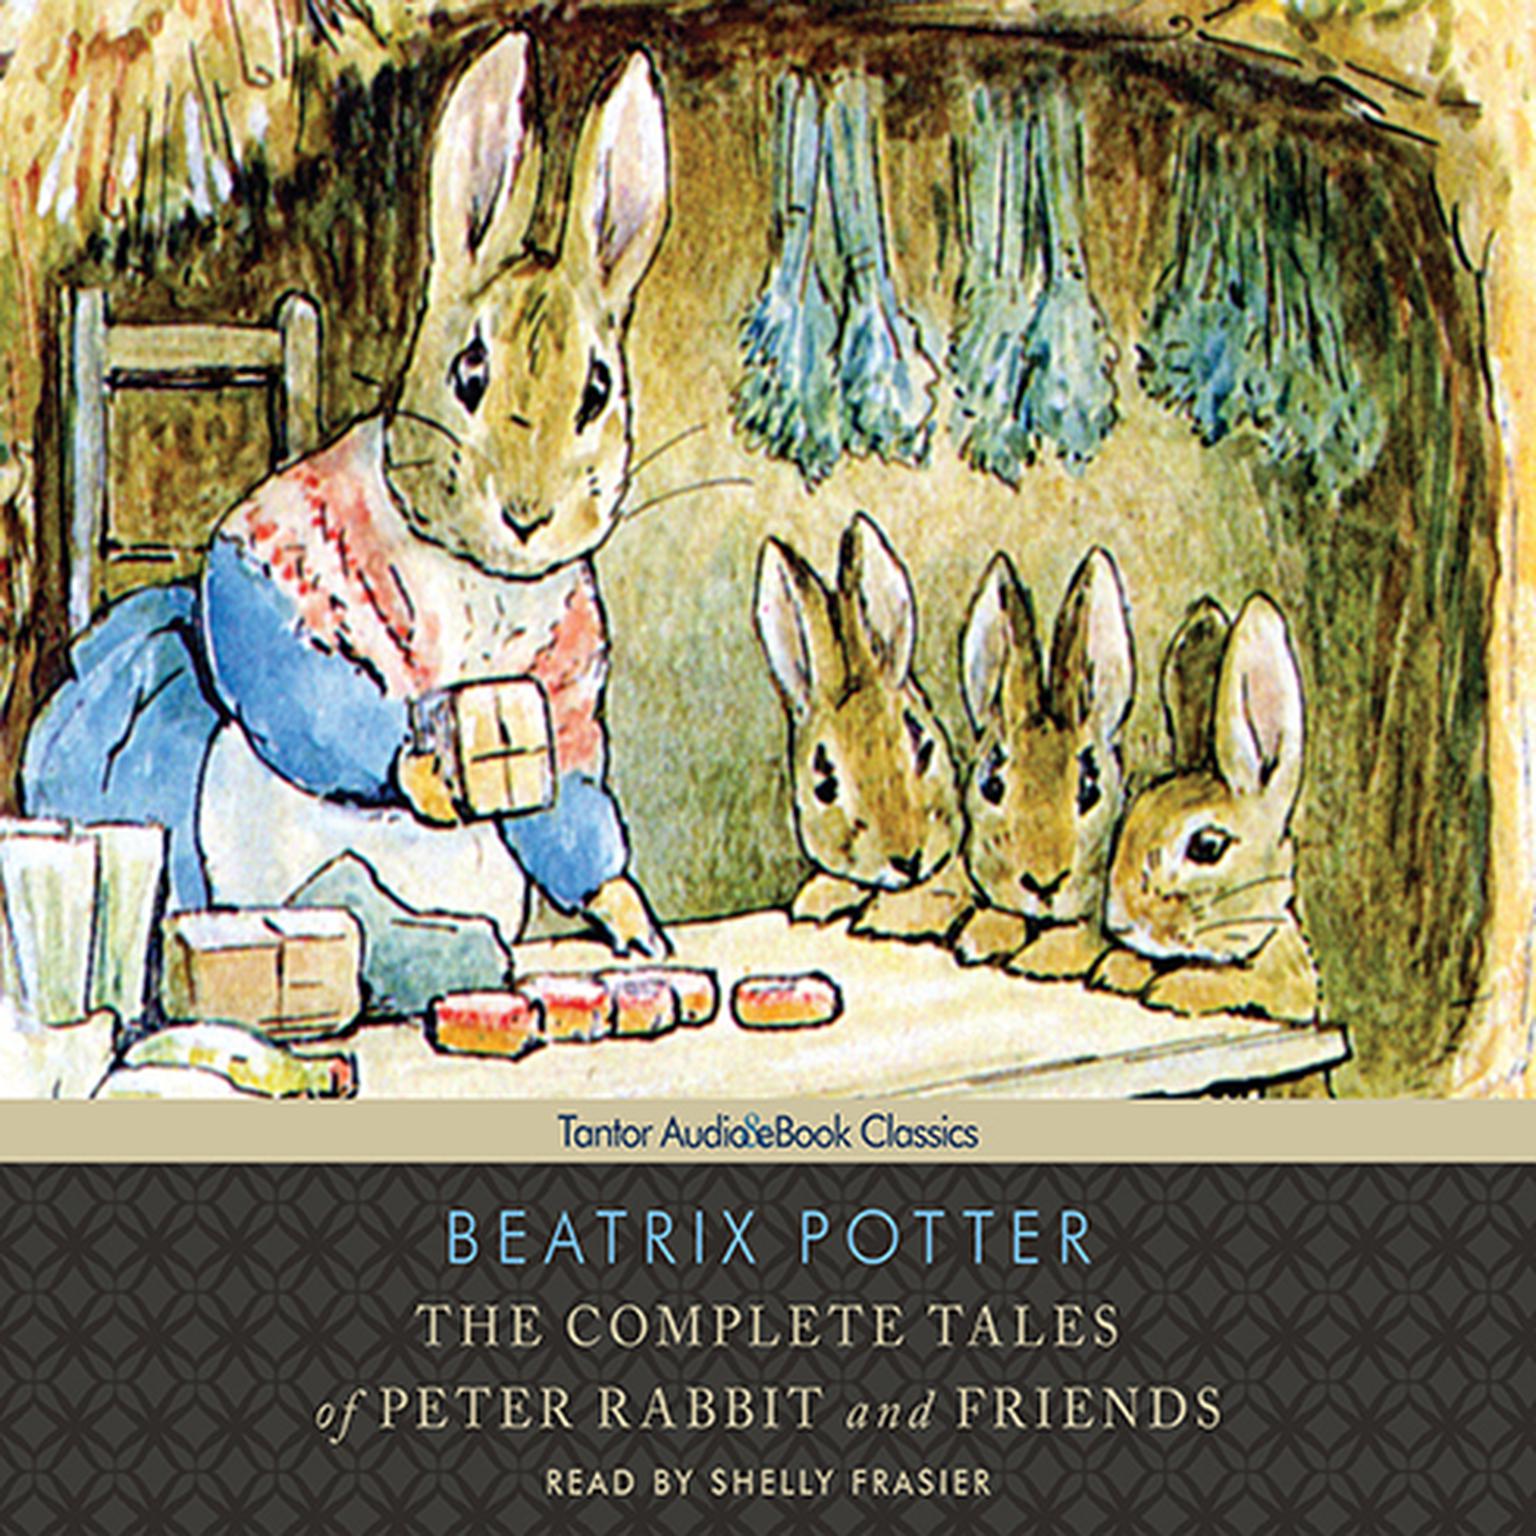 The Complete Tales of Peter Rabbit and Friends, with eBook Audiobook, by Beatrix Potter